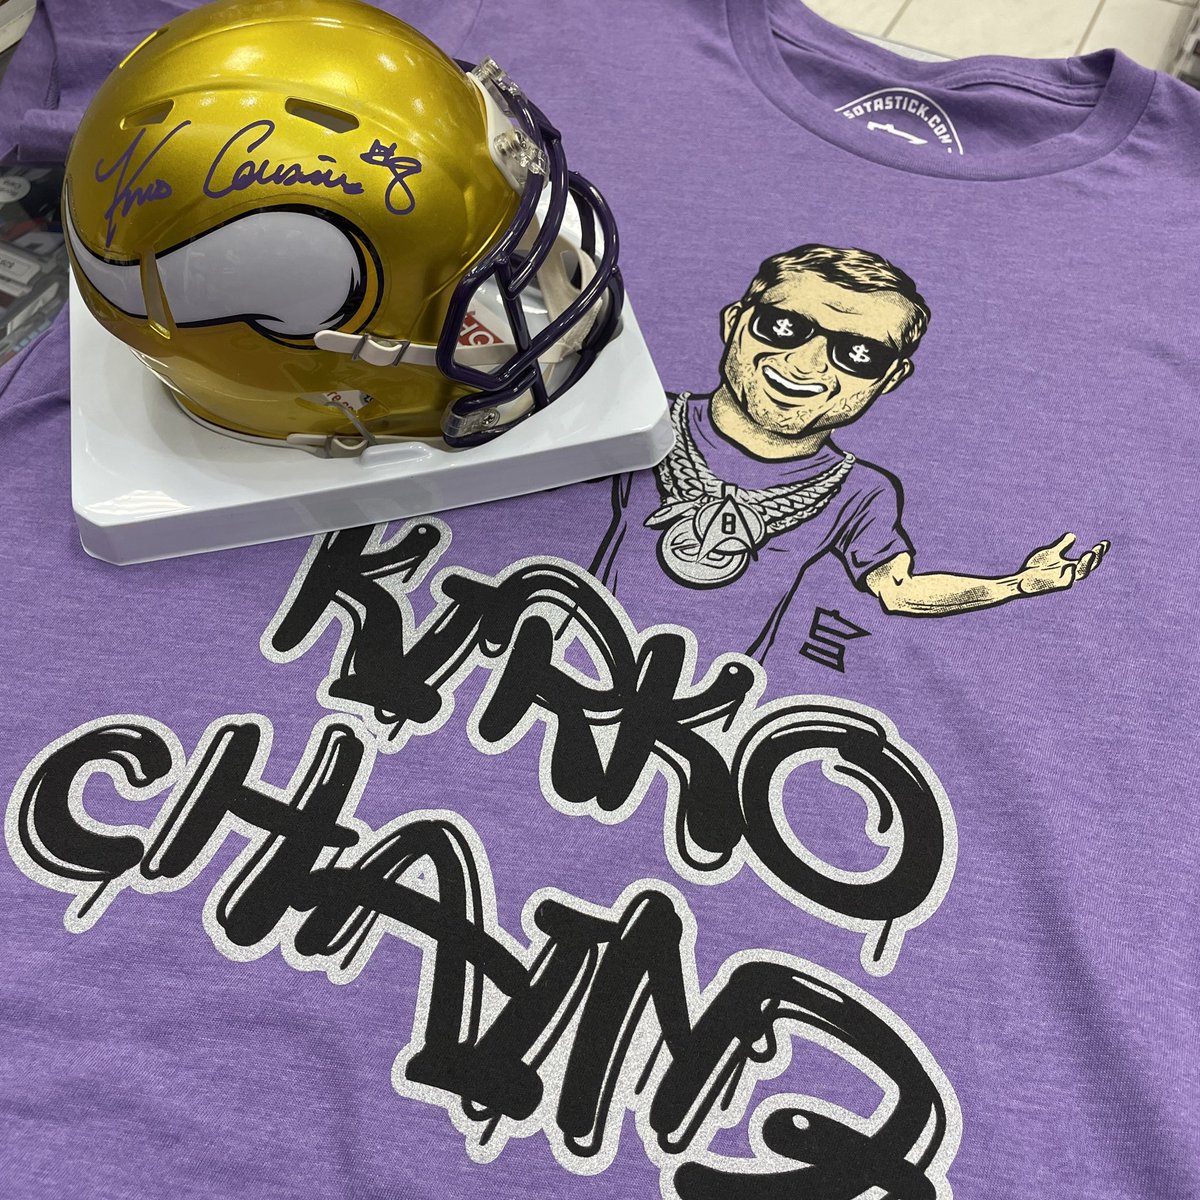 🏈GIVEAWAY🏈 If Kirk Cousins throws 4 TD passes in today’s game, one lucky follower will get this autographed mini helmet! RT and FOLLOW for your chance to win #SKOL